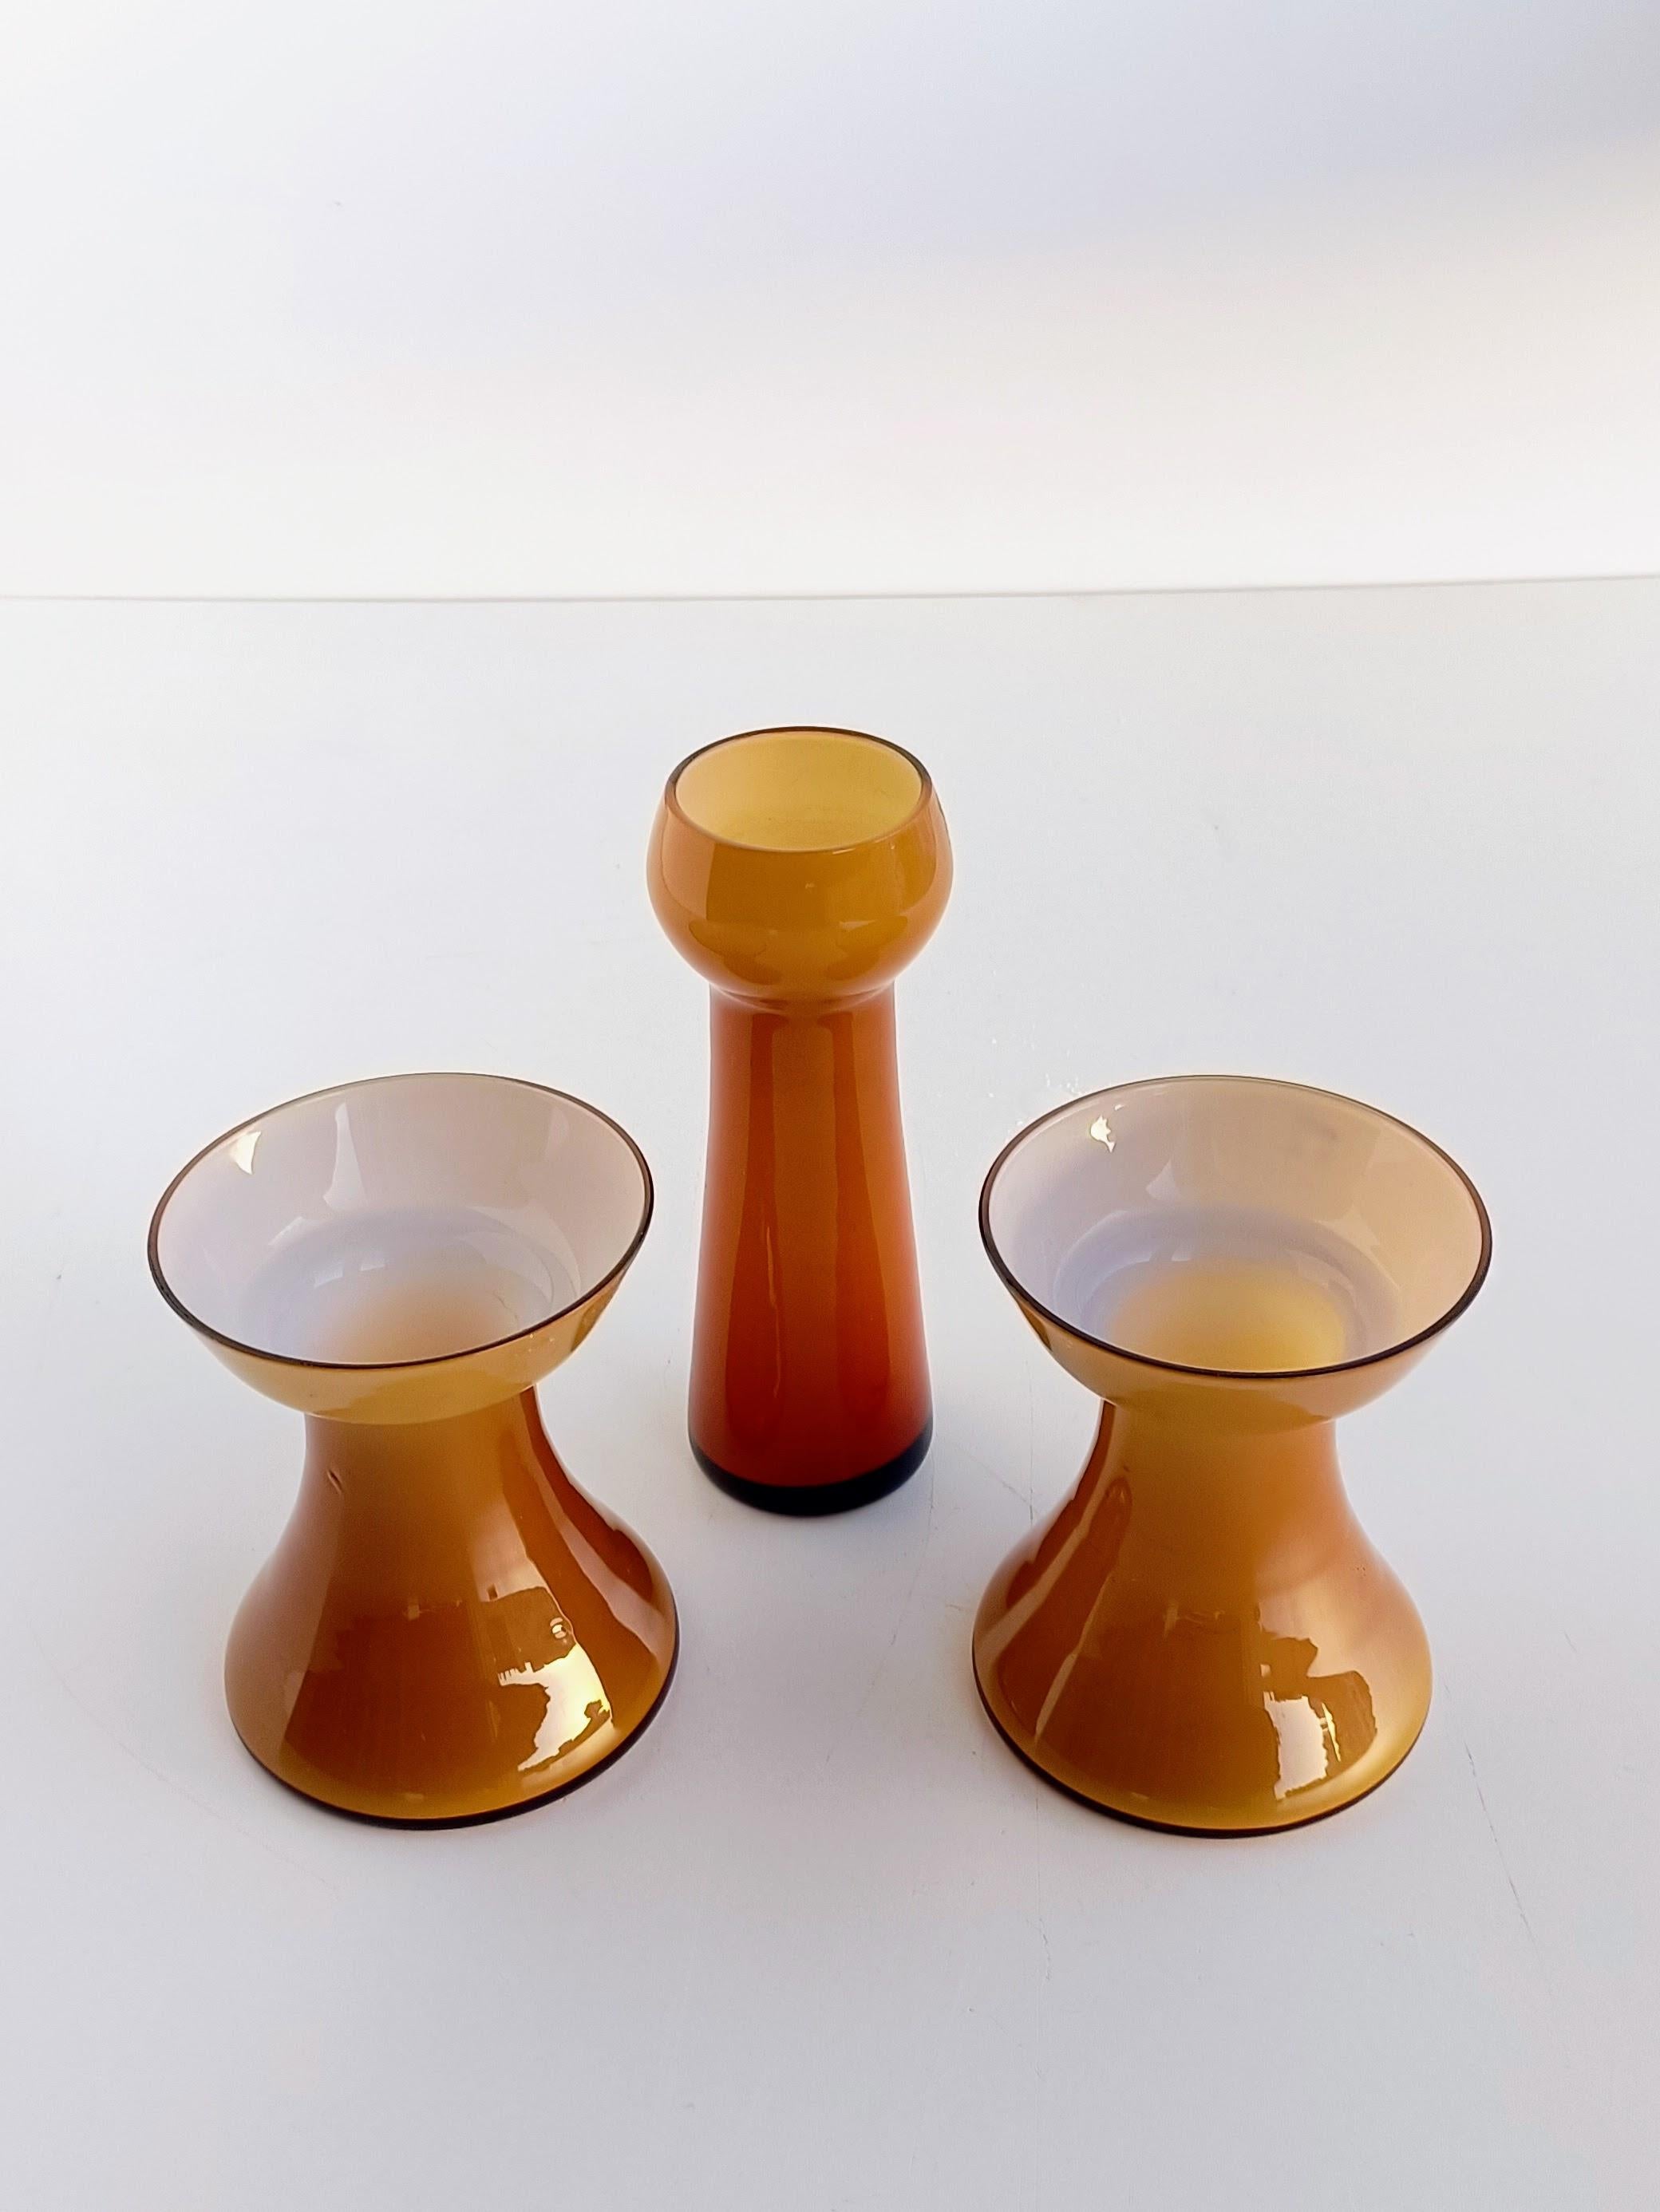 Art Glass Scandinavian Mid Century Alsterfors by Per Olof Ström Set of Candle Holders For Sale